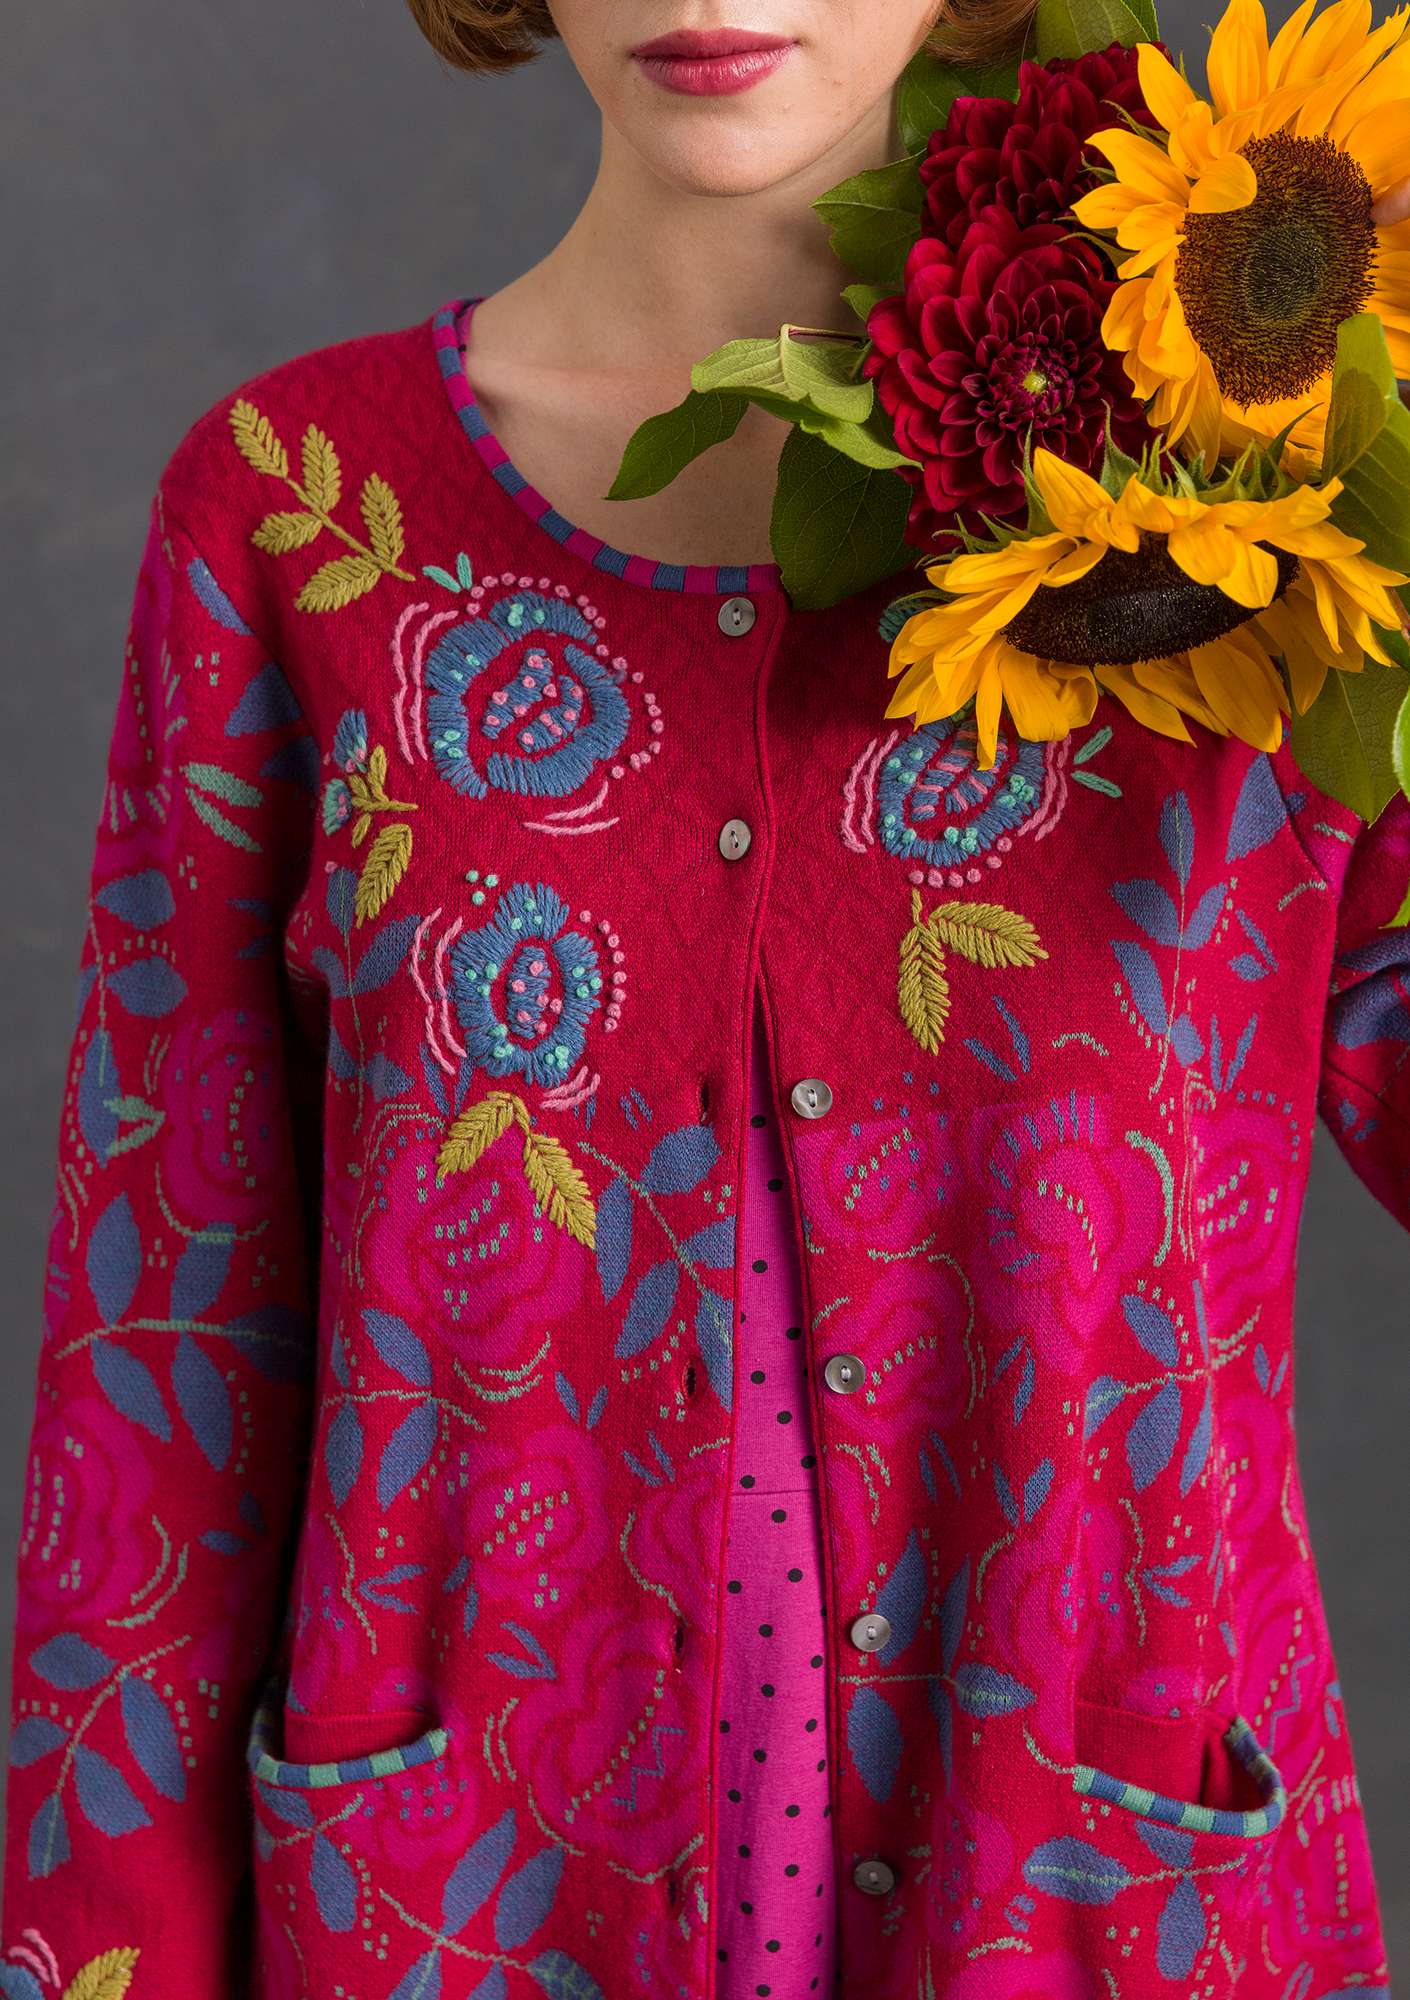 “China Rose” hand-embroidered cardigan in a wool and organic cotton blend cranberry